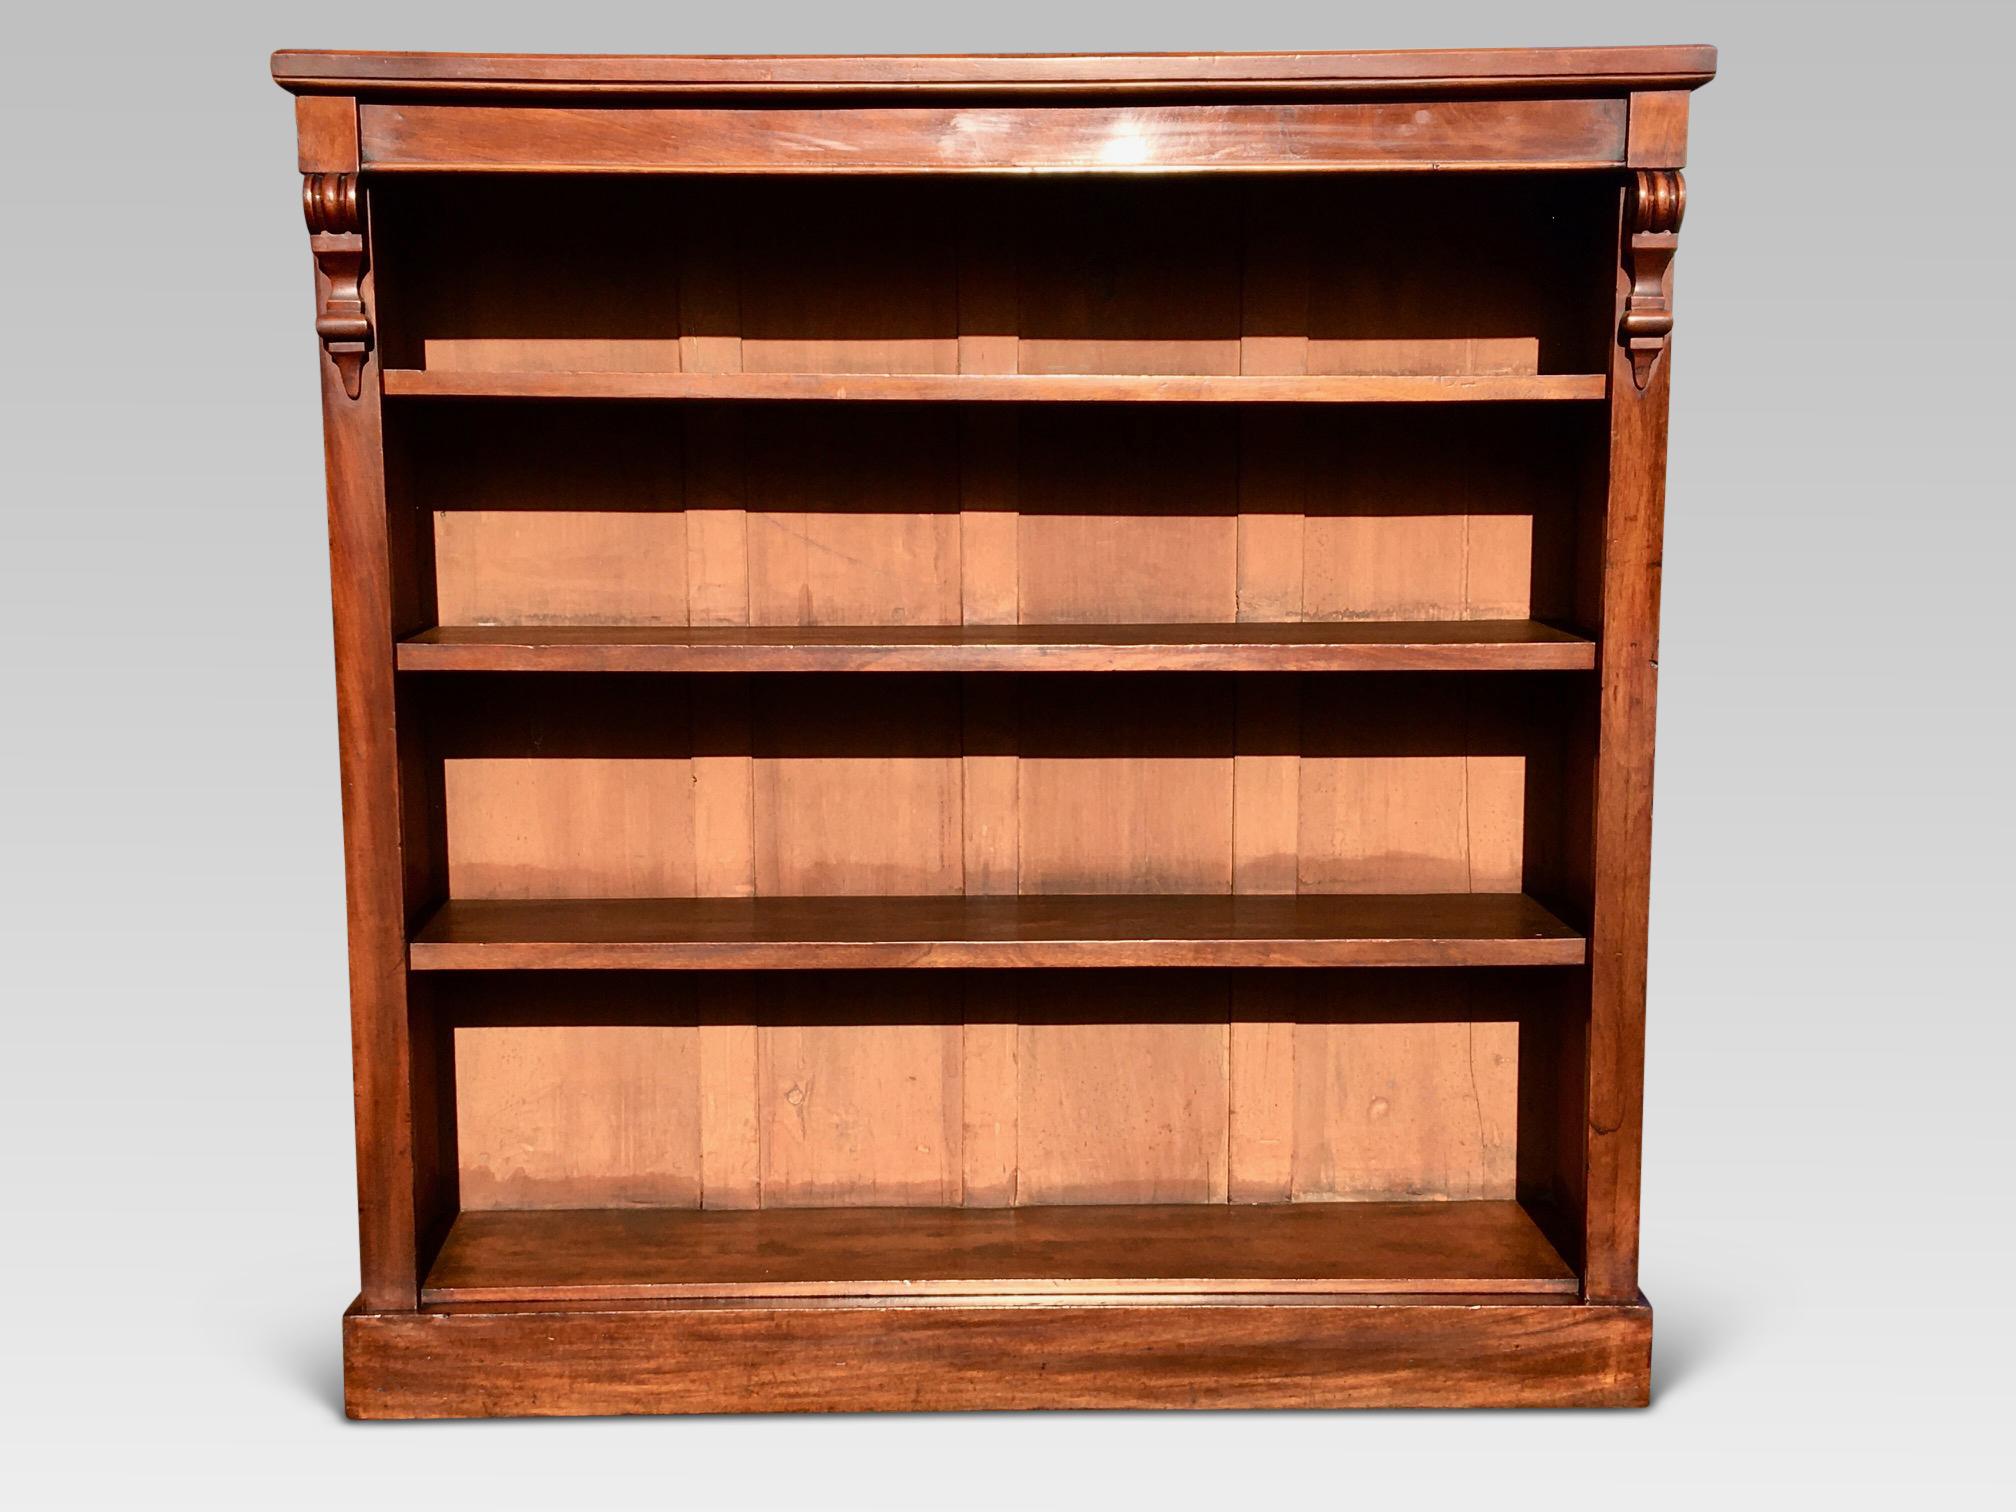 Attractive English mahogany open bookcase dated to circa 1880.
This delightful bookcase is in super condition, having been cleaned and lightly
refurbished then wax polished. It has 4 adjustable and sturdy shelves with a book depth
of 9 inches.